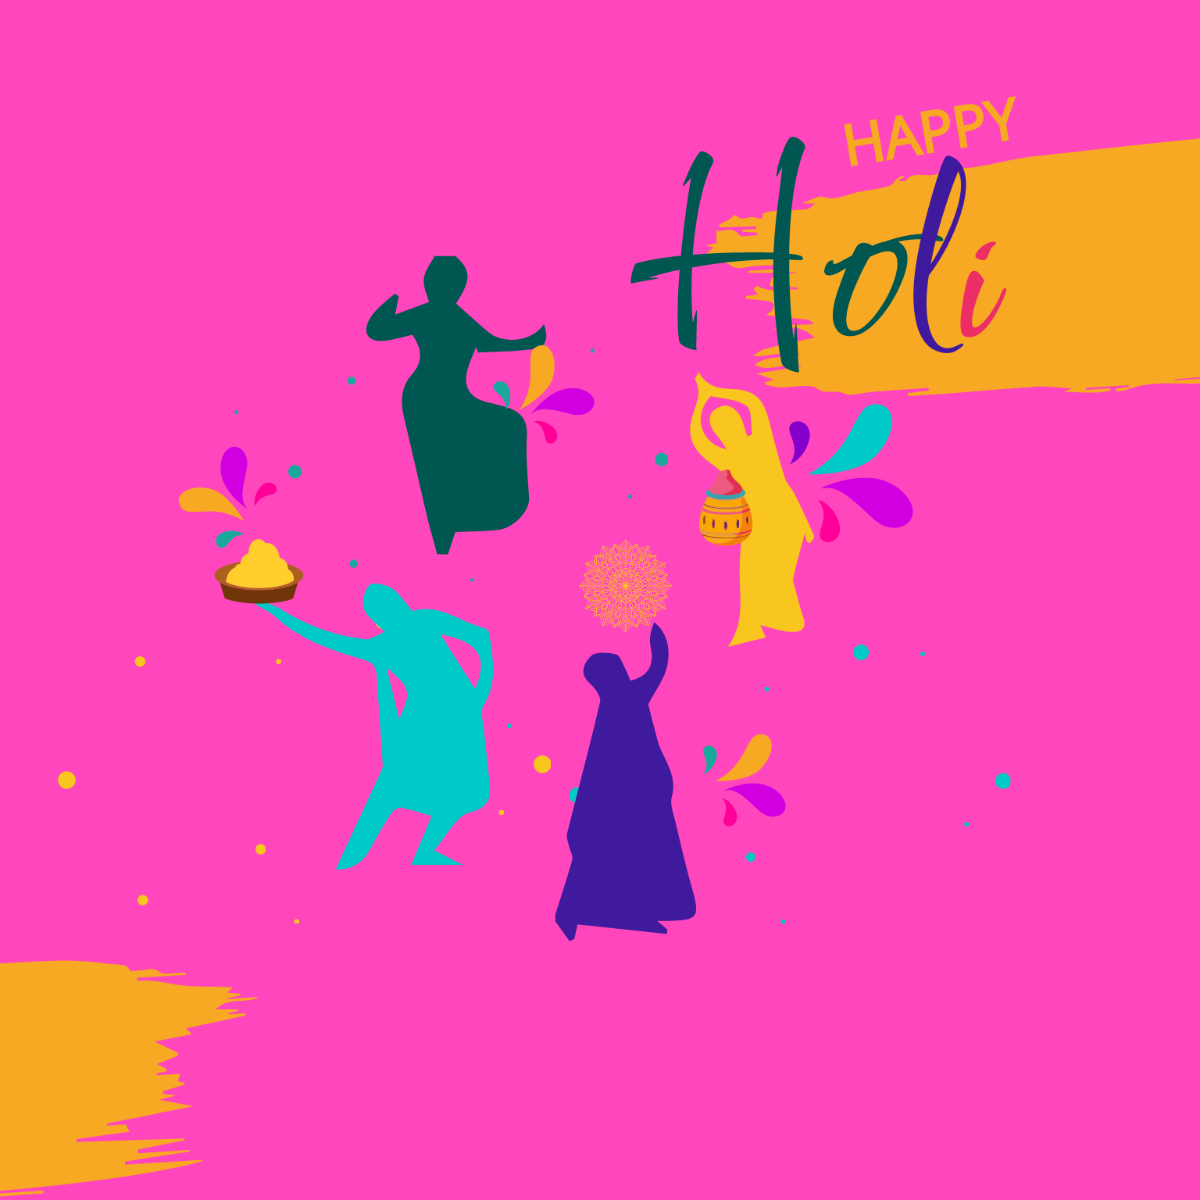 Free Holi Wishes Vector Template